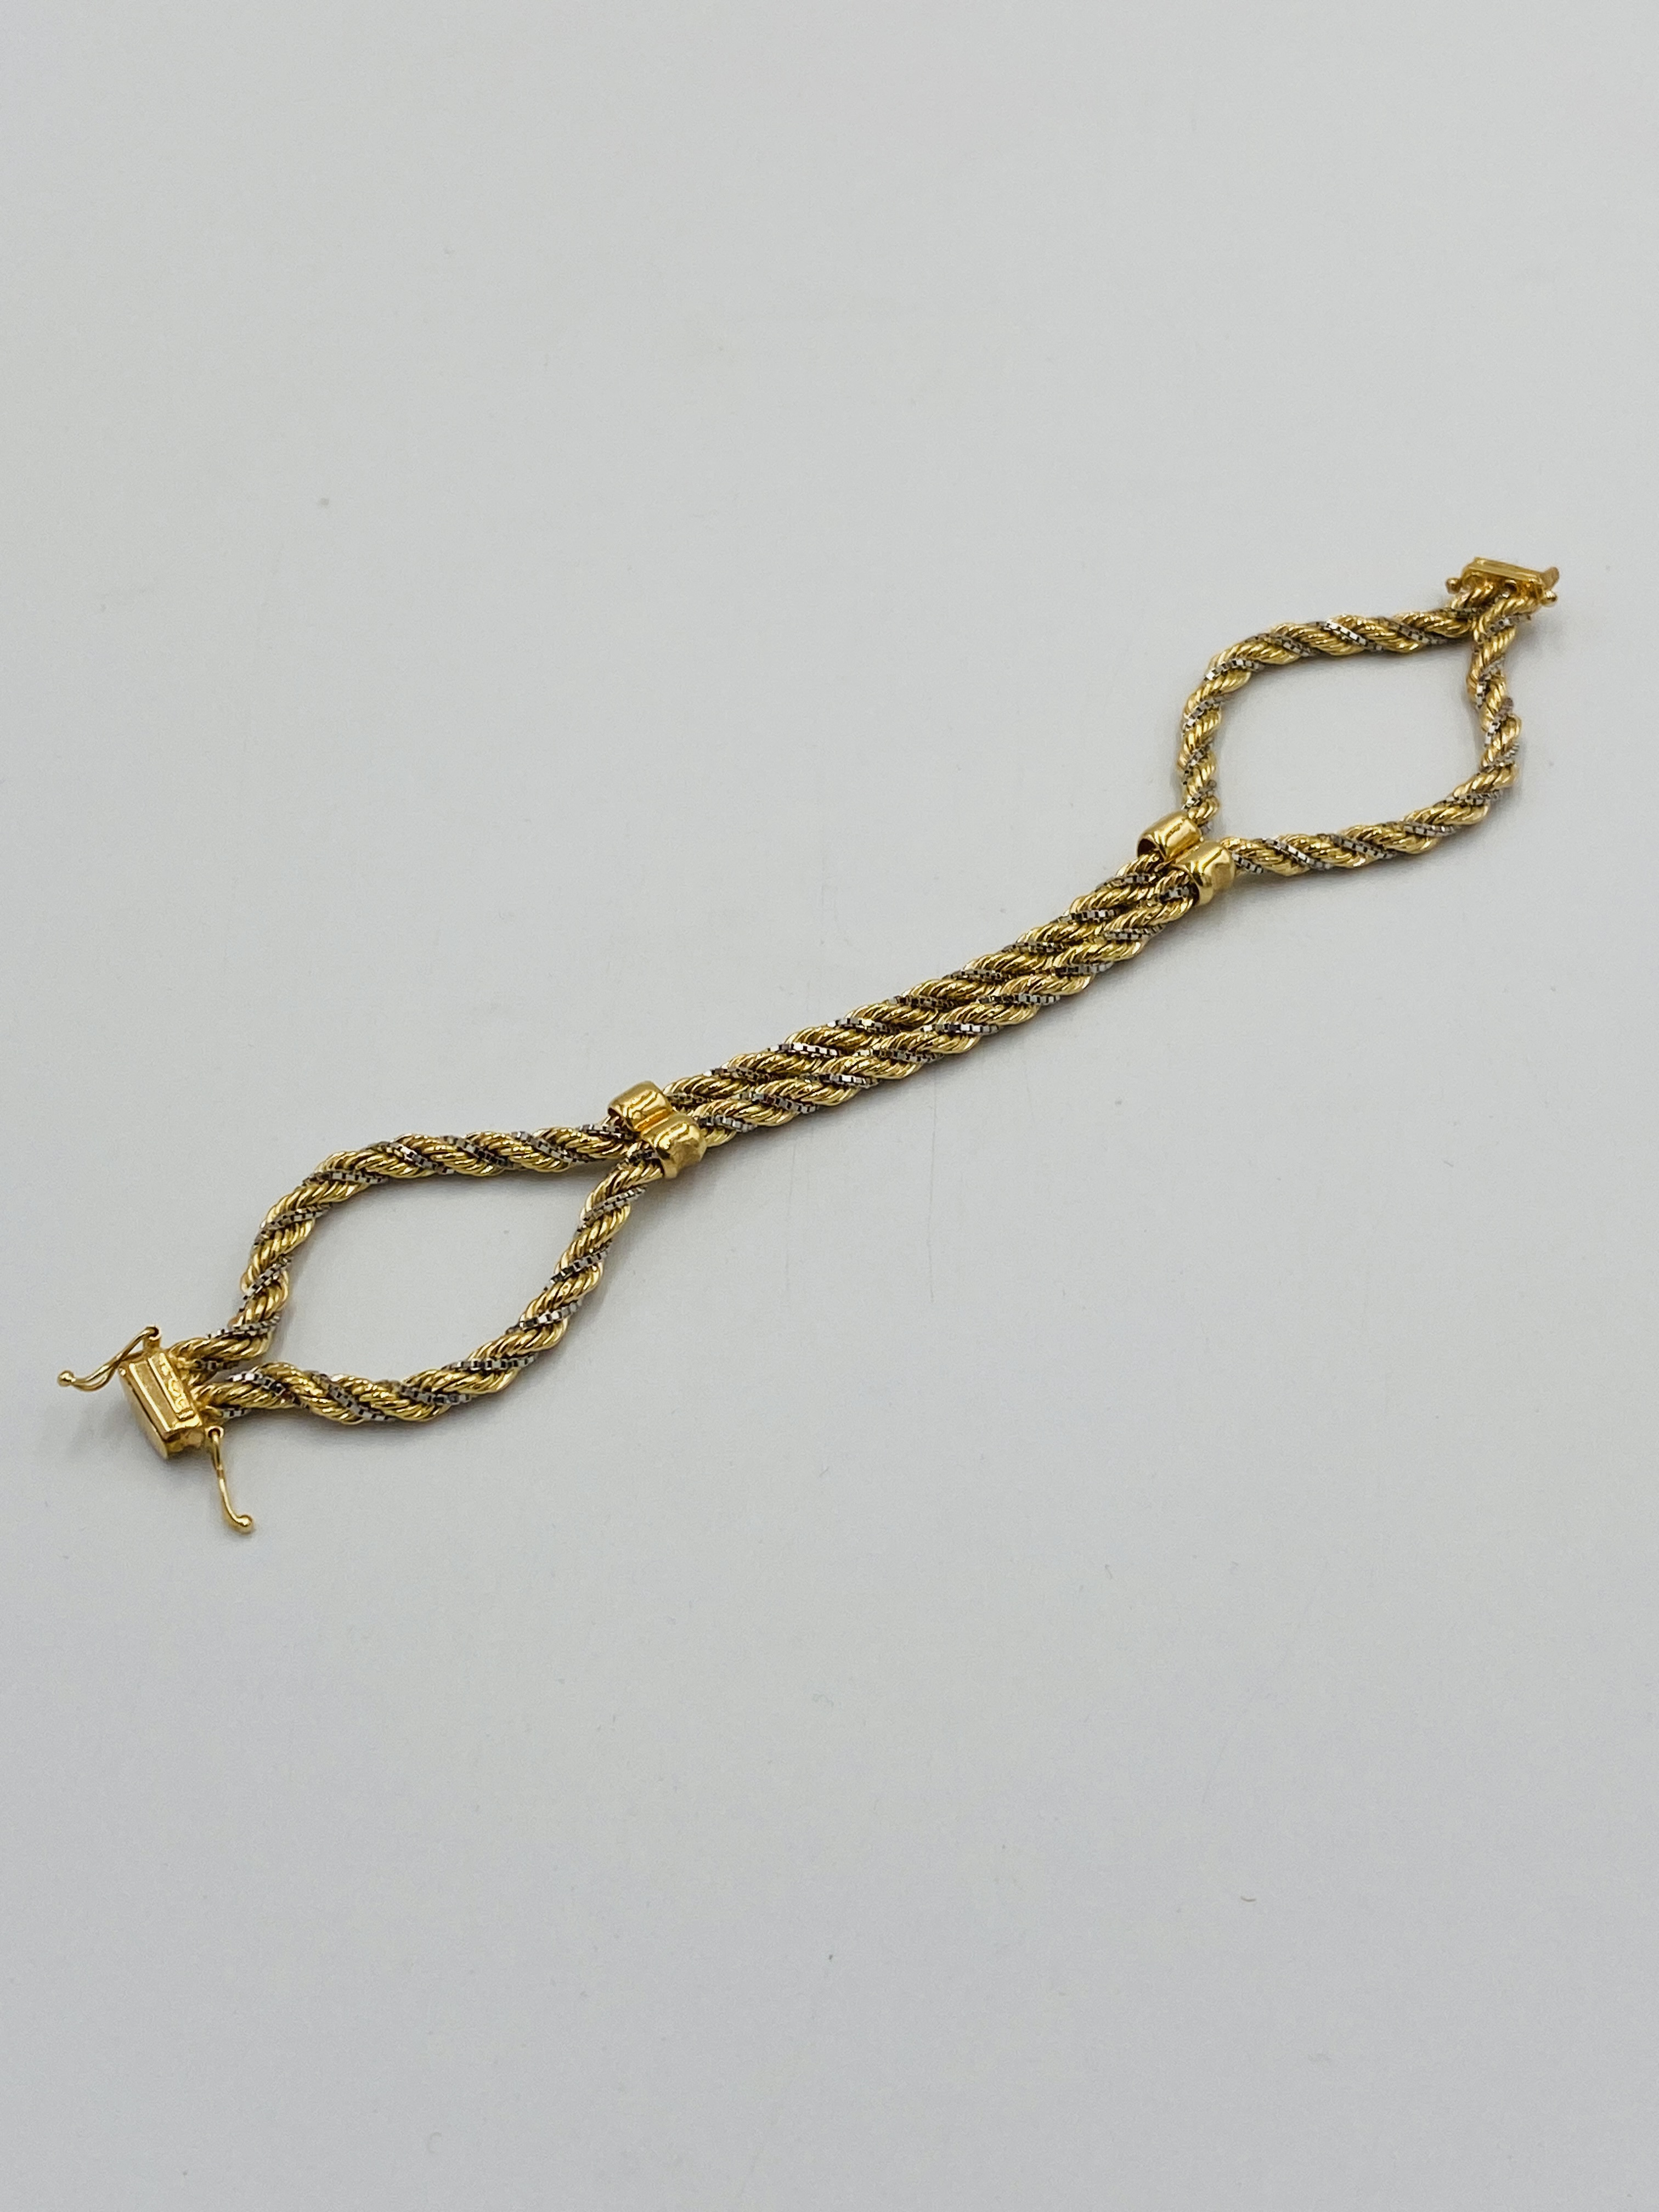 9ct gold and white metal rope twist bracelet - Image 5 of 6